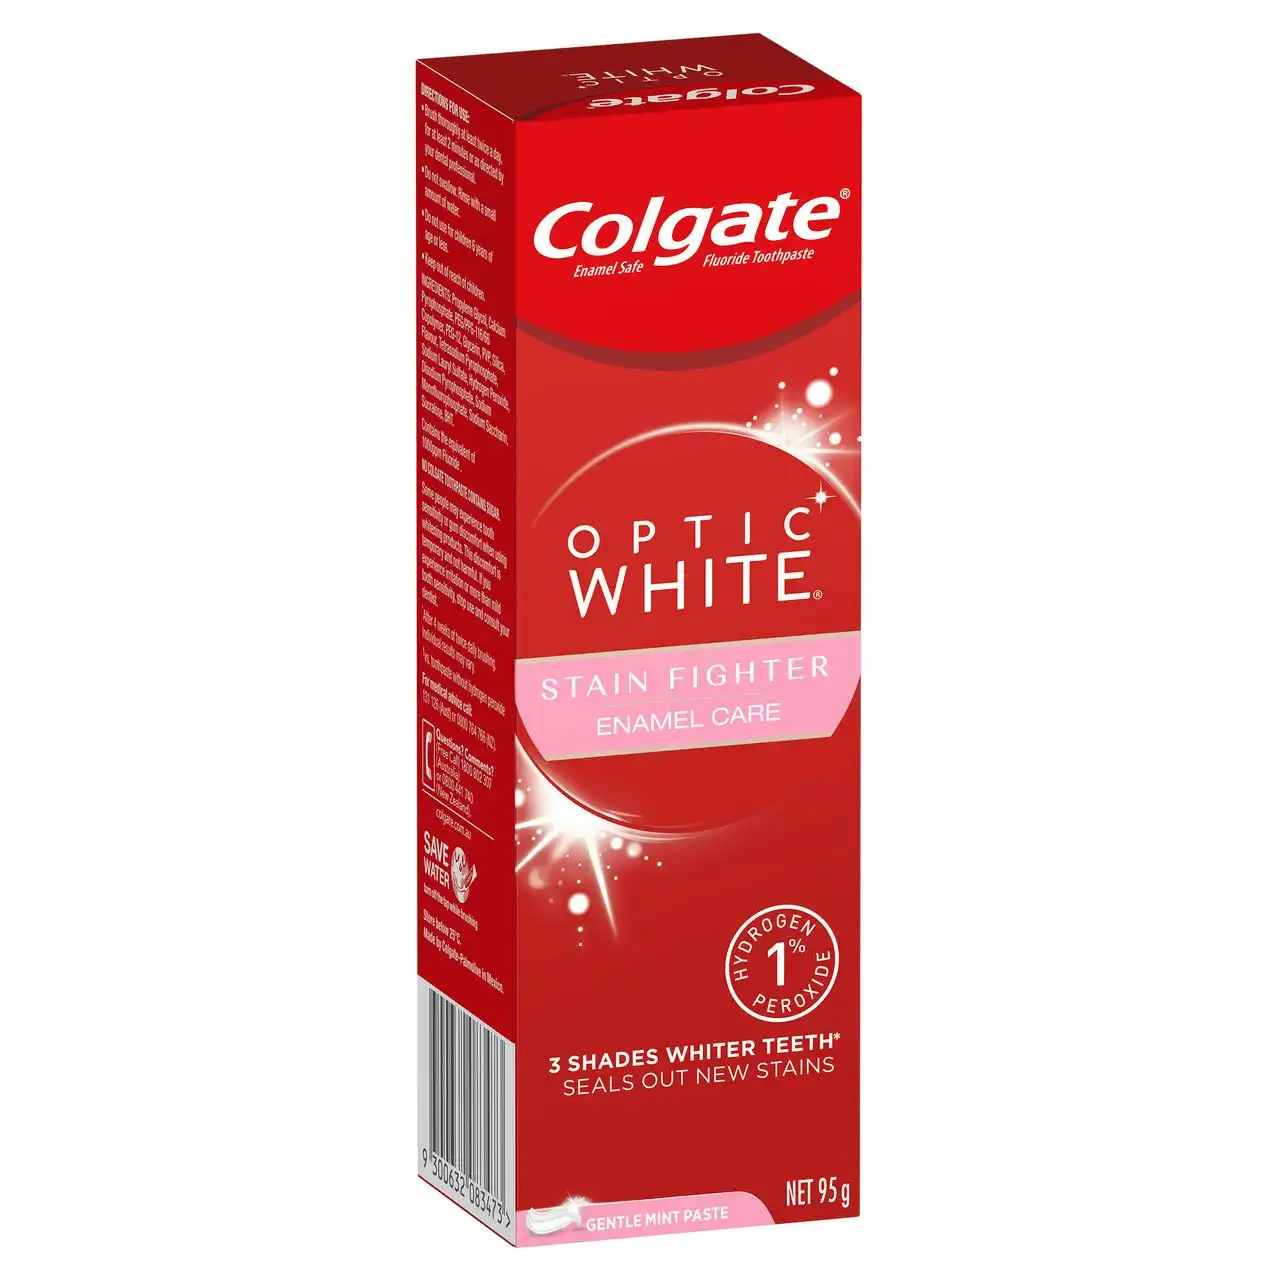 Colgate Optic White Stain Fighter Teeth Whitening Toothpaste 95g, Enamel Care, with 1% Hydrogen Peroxide